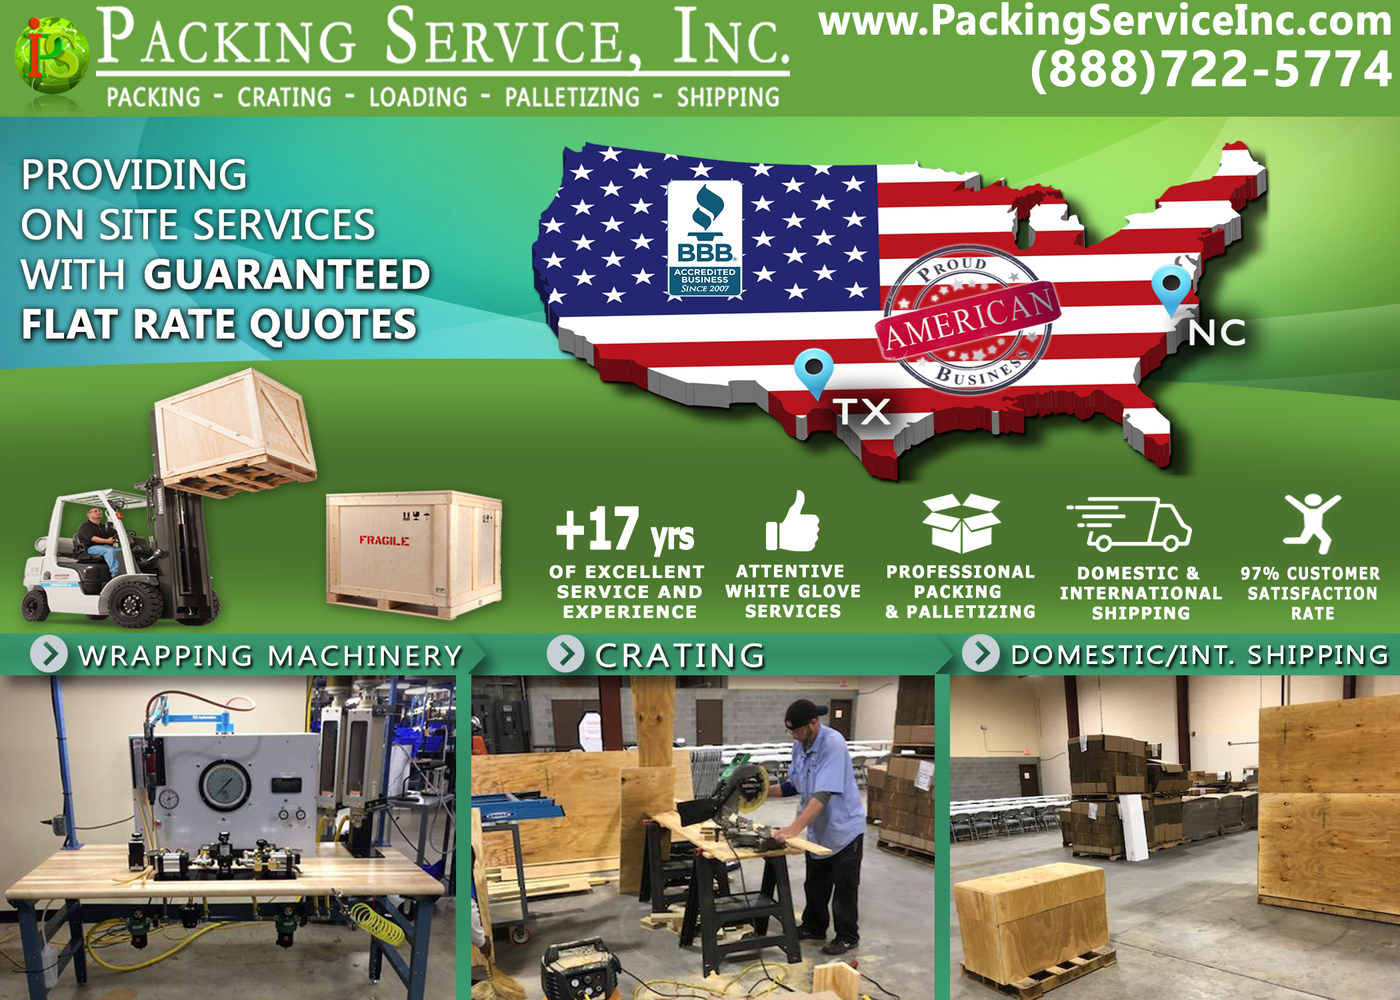 Packing Service Inc. is a company that offers exclusive packing, loading, crating, palletizing and shipping services nationwide.